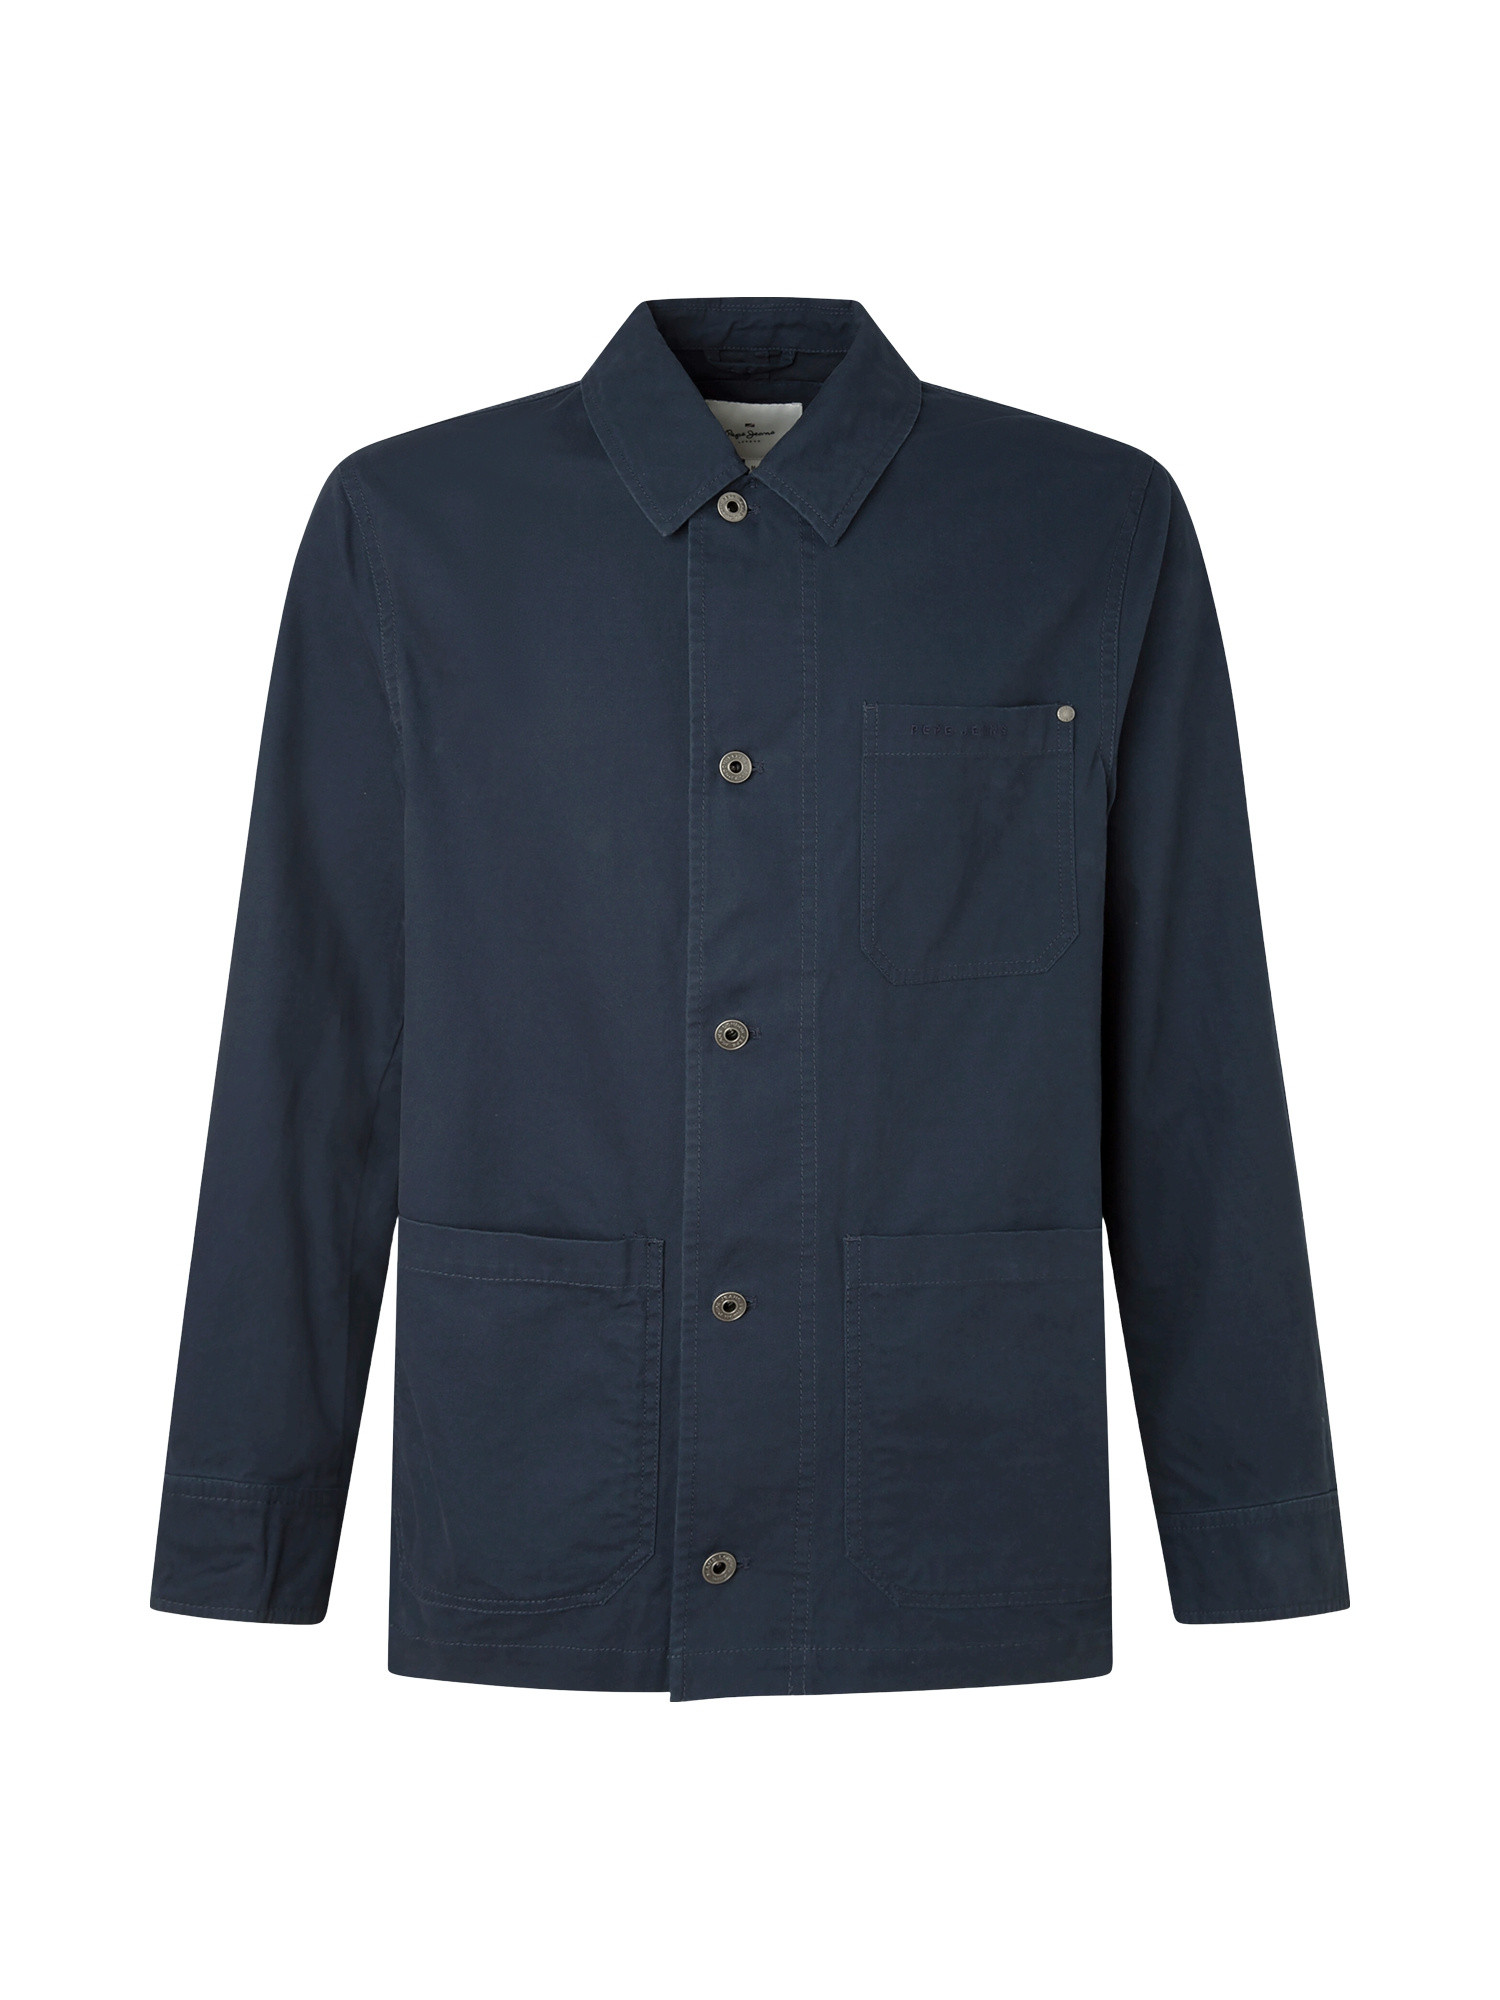 Pepe Jeans - Giacca in cotone, Blu scuro, large image number 0